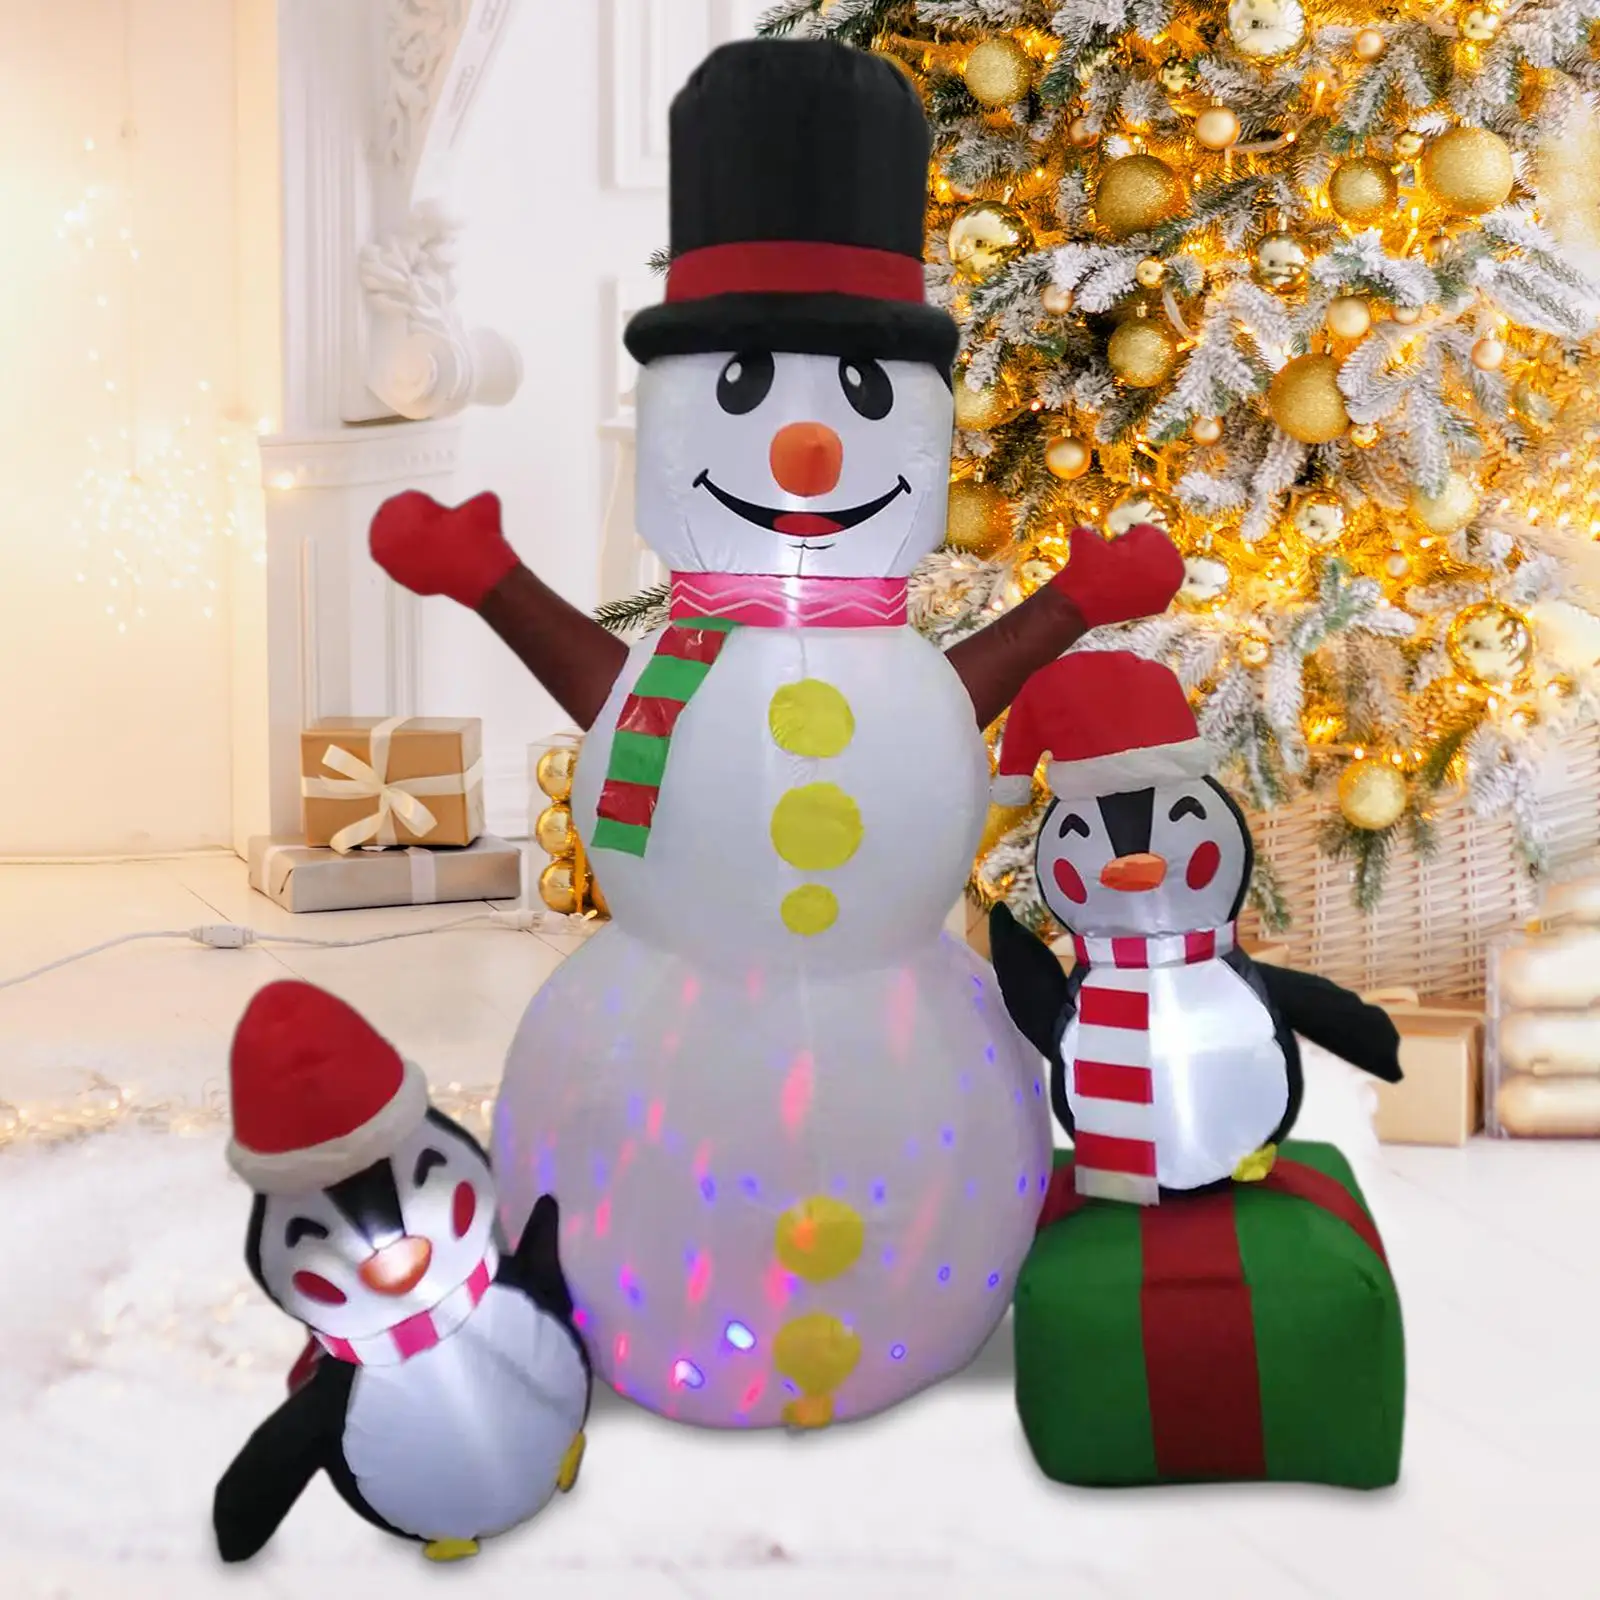 

Christmas Inflatable Snowman 5.9ft Tall Weatherproof Luminous Toy Outdoor Decoration for Garden Outside Patio Holiday Decor